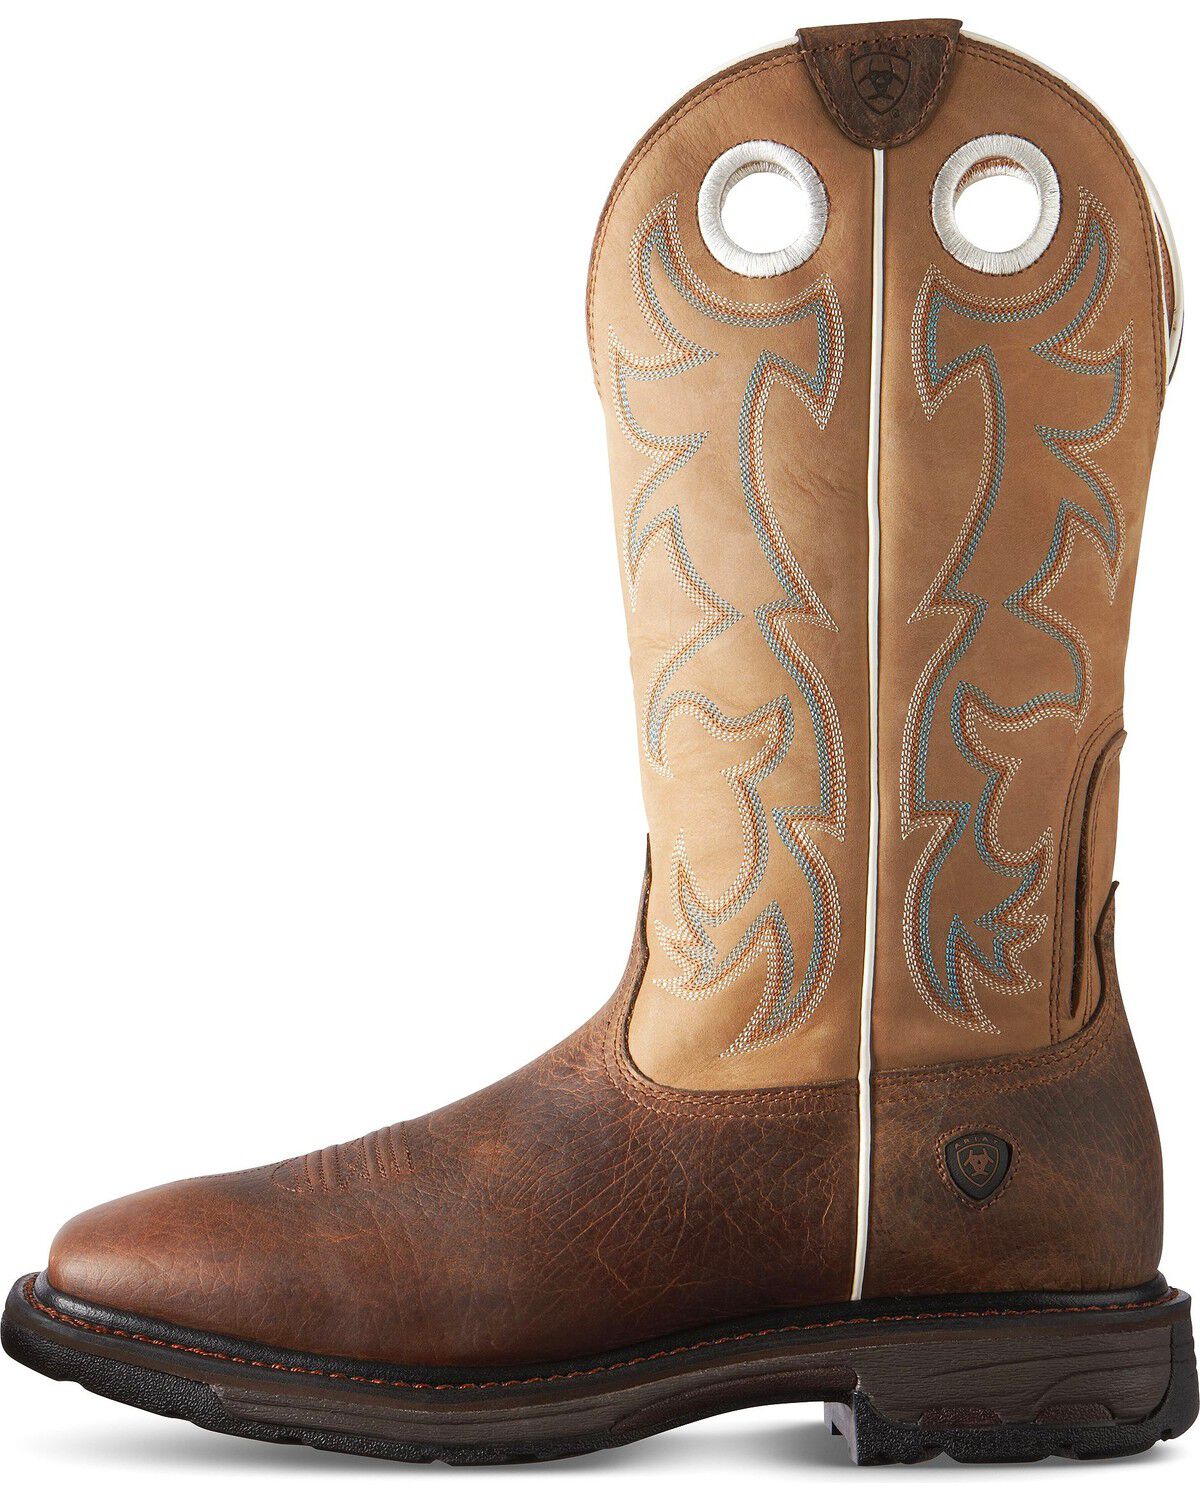 Ariat Workhog Pull-On Work Boots 